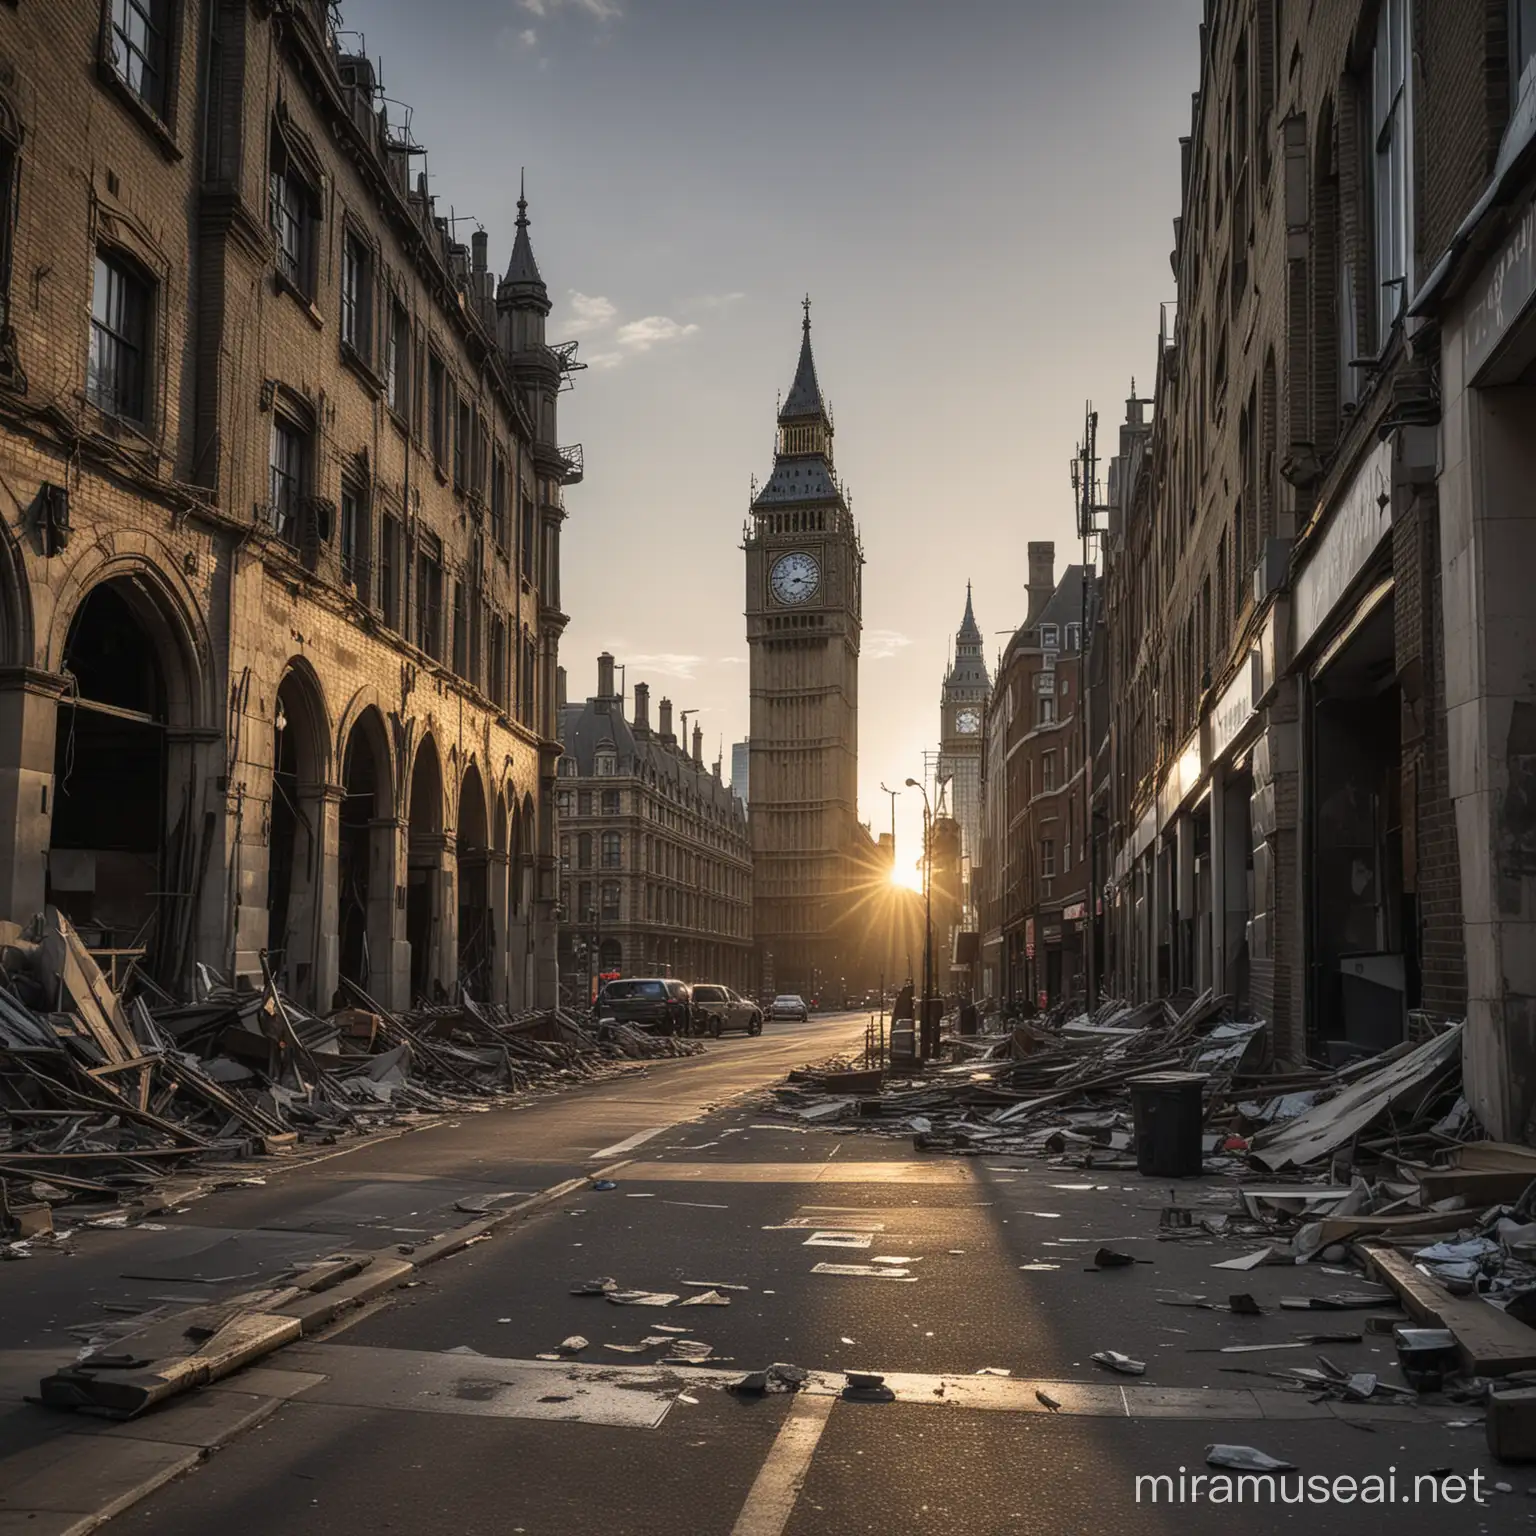 A very wide angle image of destroyed and decaying dystopian London, featuring landmarks, like big ben, the Gherkin, the shard. 
At sunset from street level, but with a wide view.
